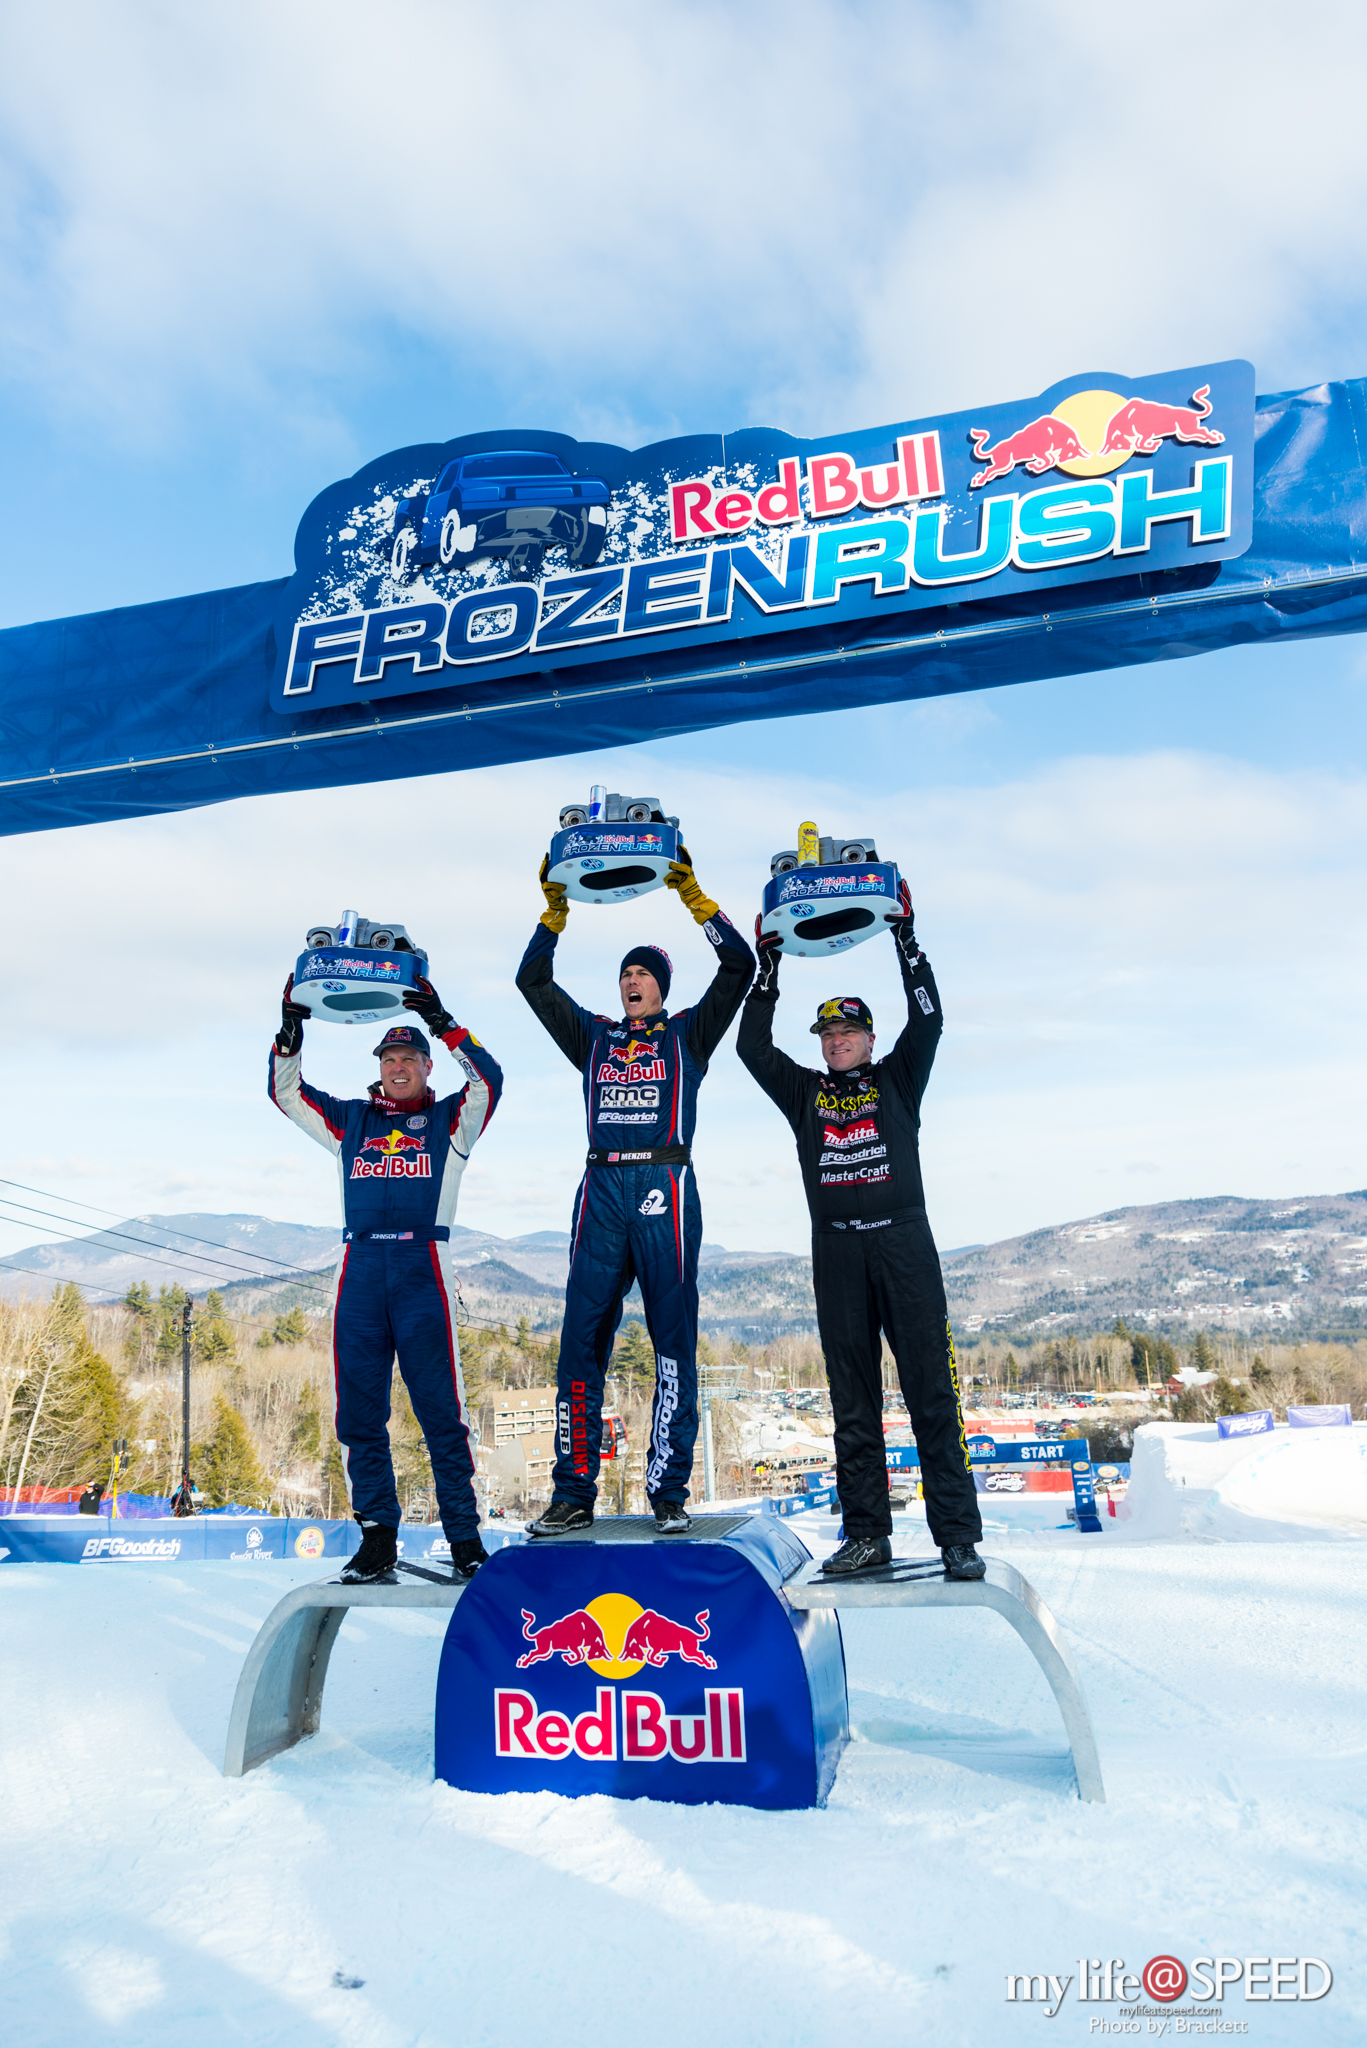 The top three hold up their customer trophies during the ceremonies following Frozen Rush. From left to right, Ricky Johnson in 2nd, Bryce Menzies in 1st and Rob Maccachren in 3rd